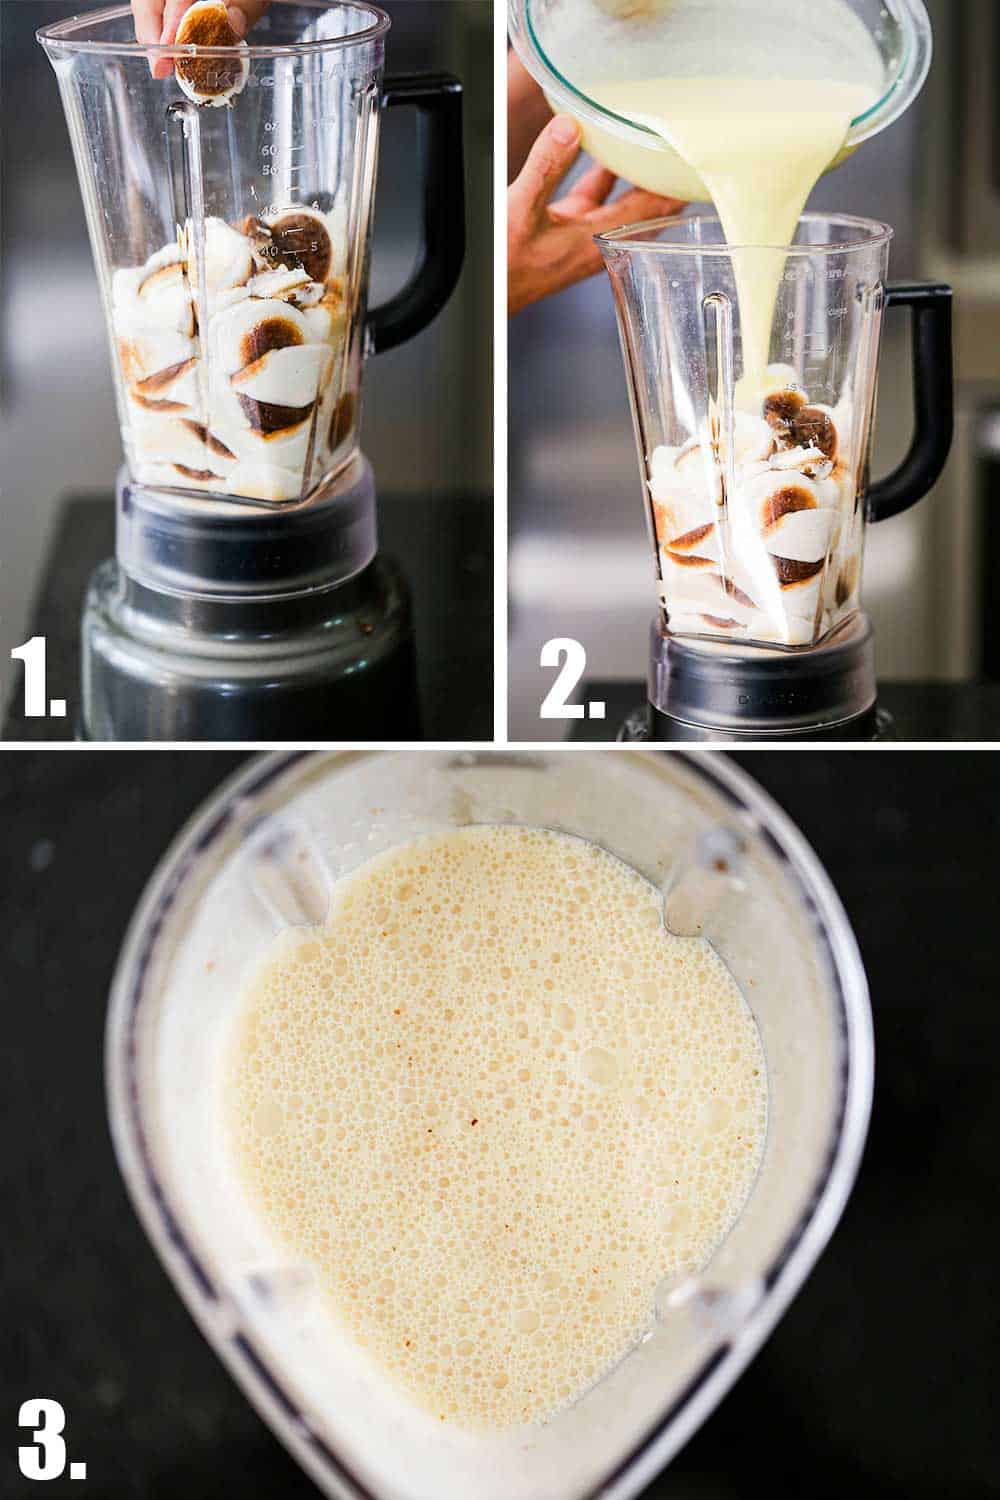 A person dropping toasted marshmallows into a blender and then custard being poured into the blender and then after the mixture has been pureed.